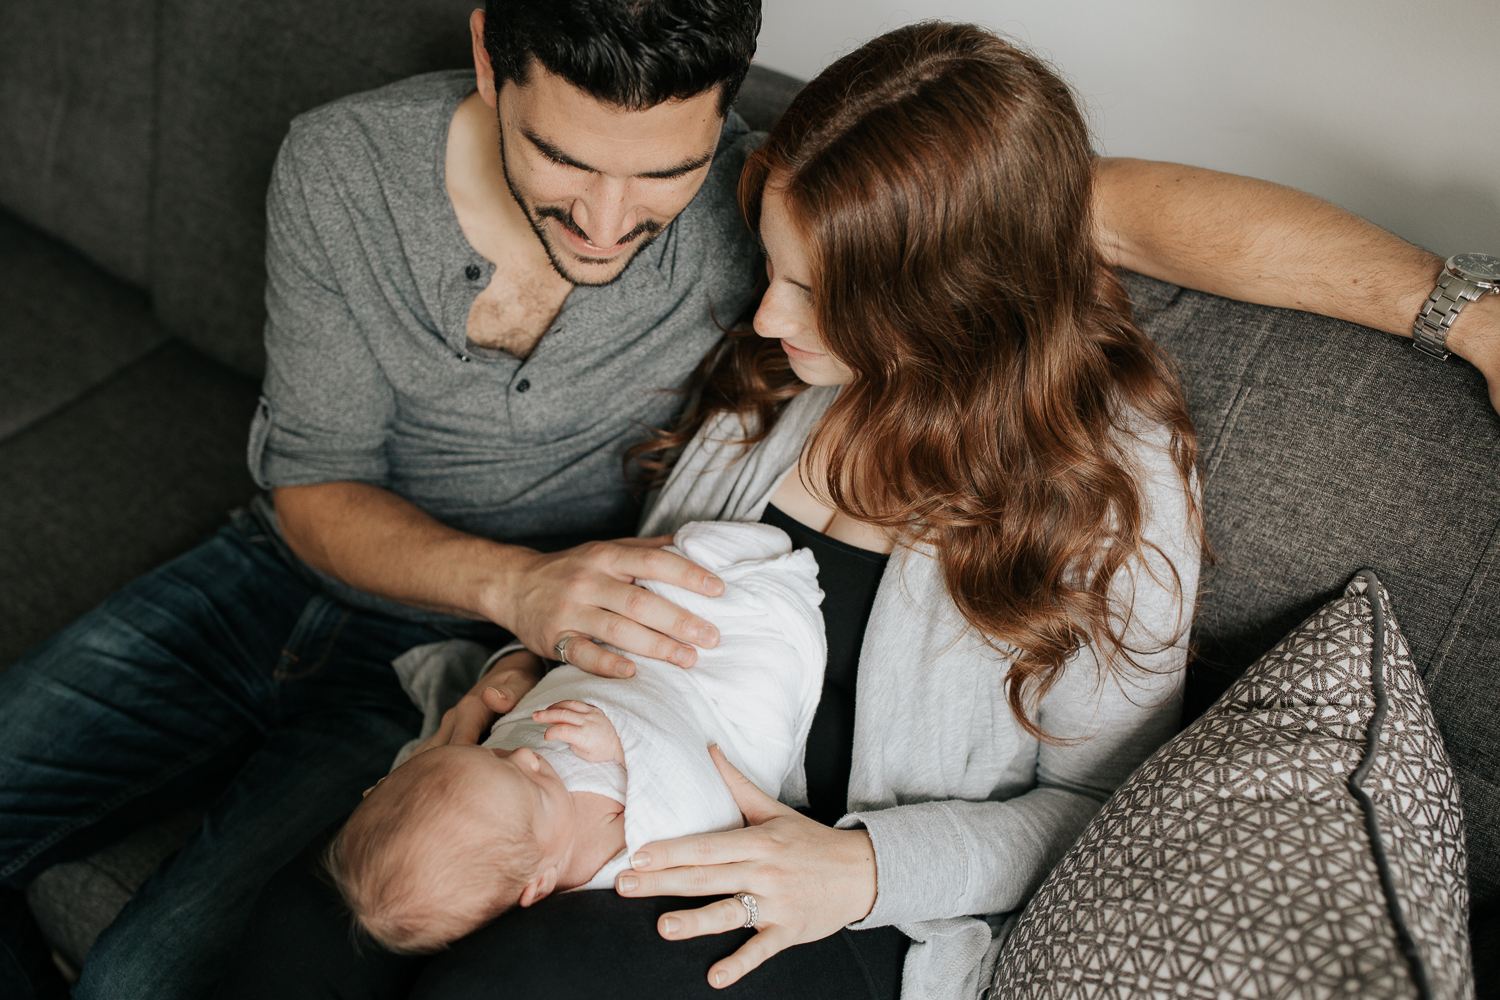 family of 3 sitting on living room couch, 2 week old baby boy lying in mom's lap, dad sitting next to them with hand on son - Newmarket In-Home Photography